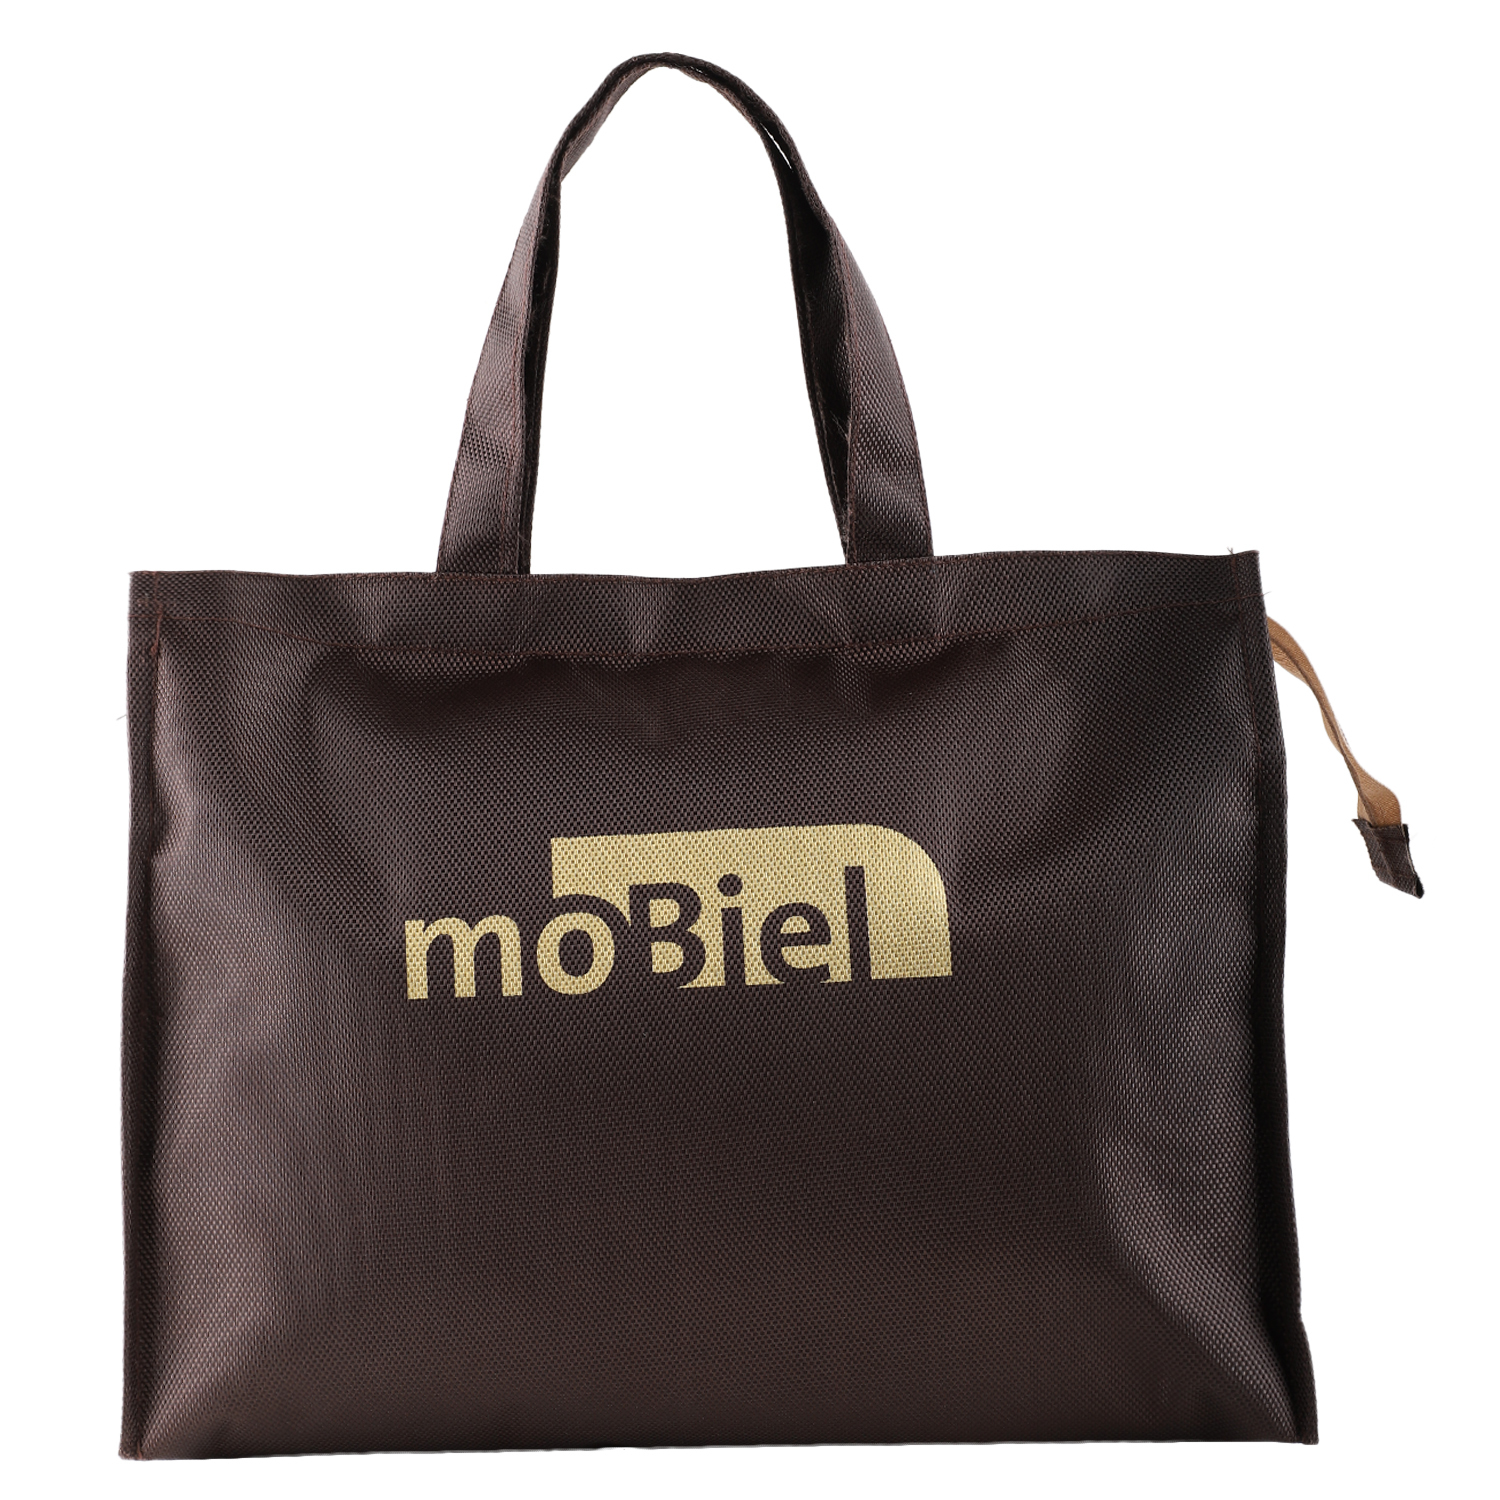 Promotional Shopping Thaila / Carry Bag